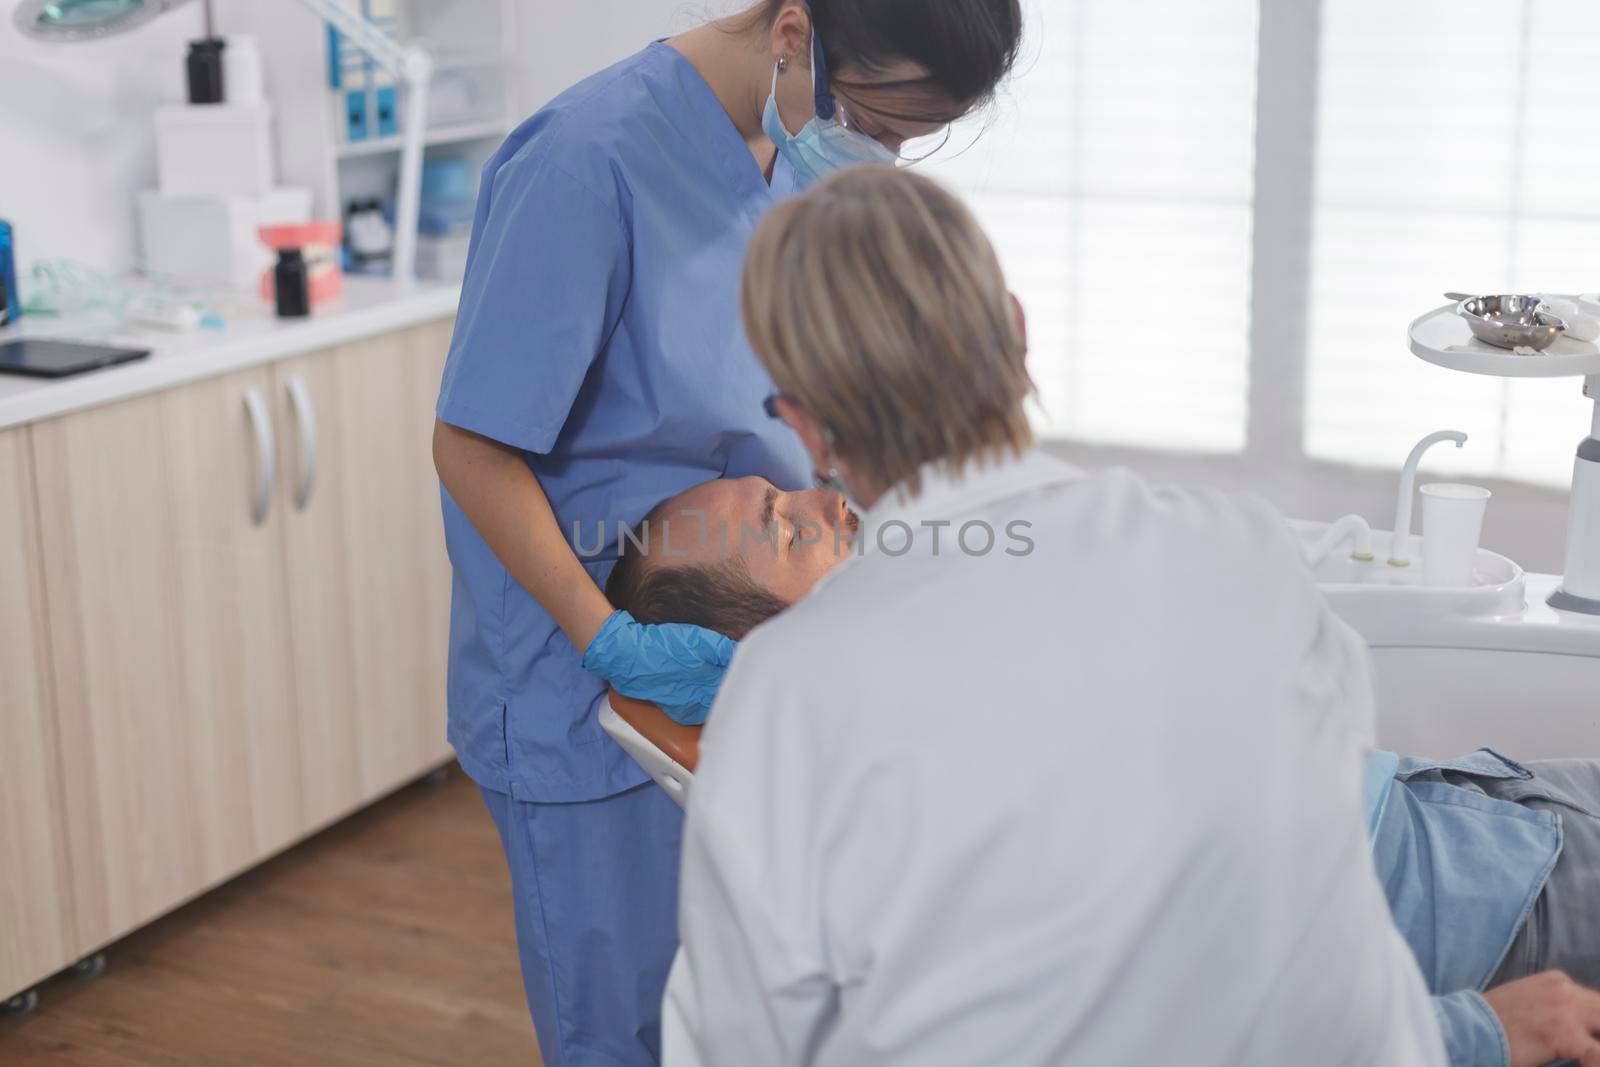 Clinical orthodontist team with face mask examining patient mouth by DCStudio